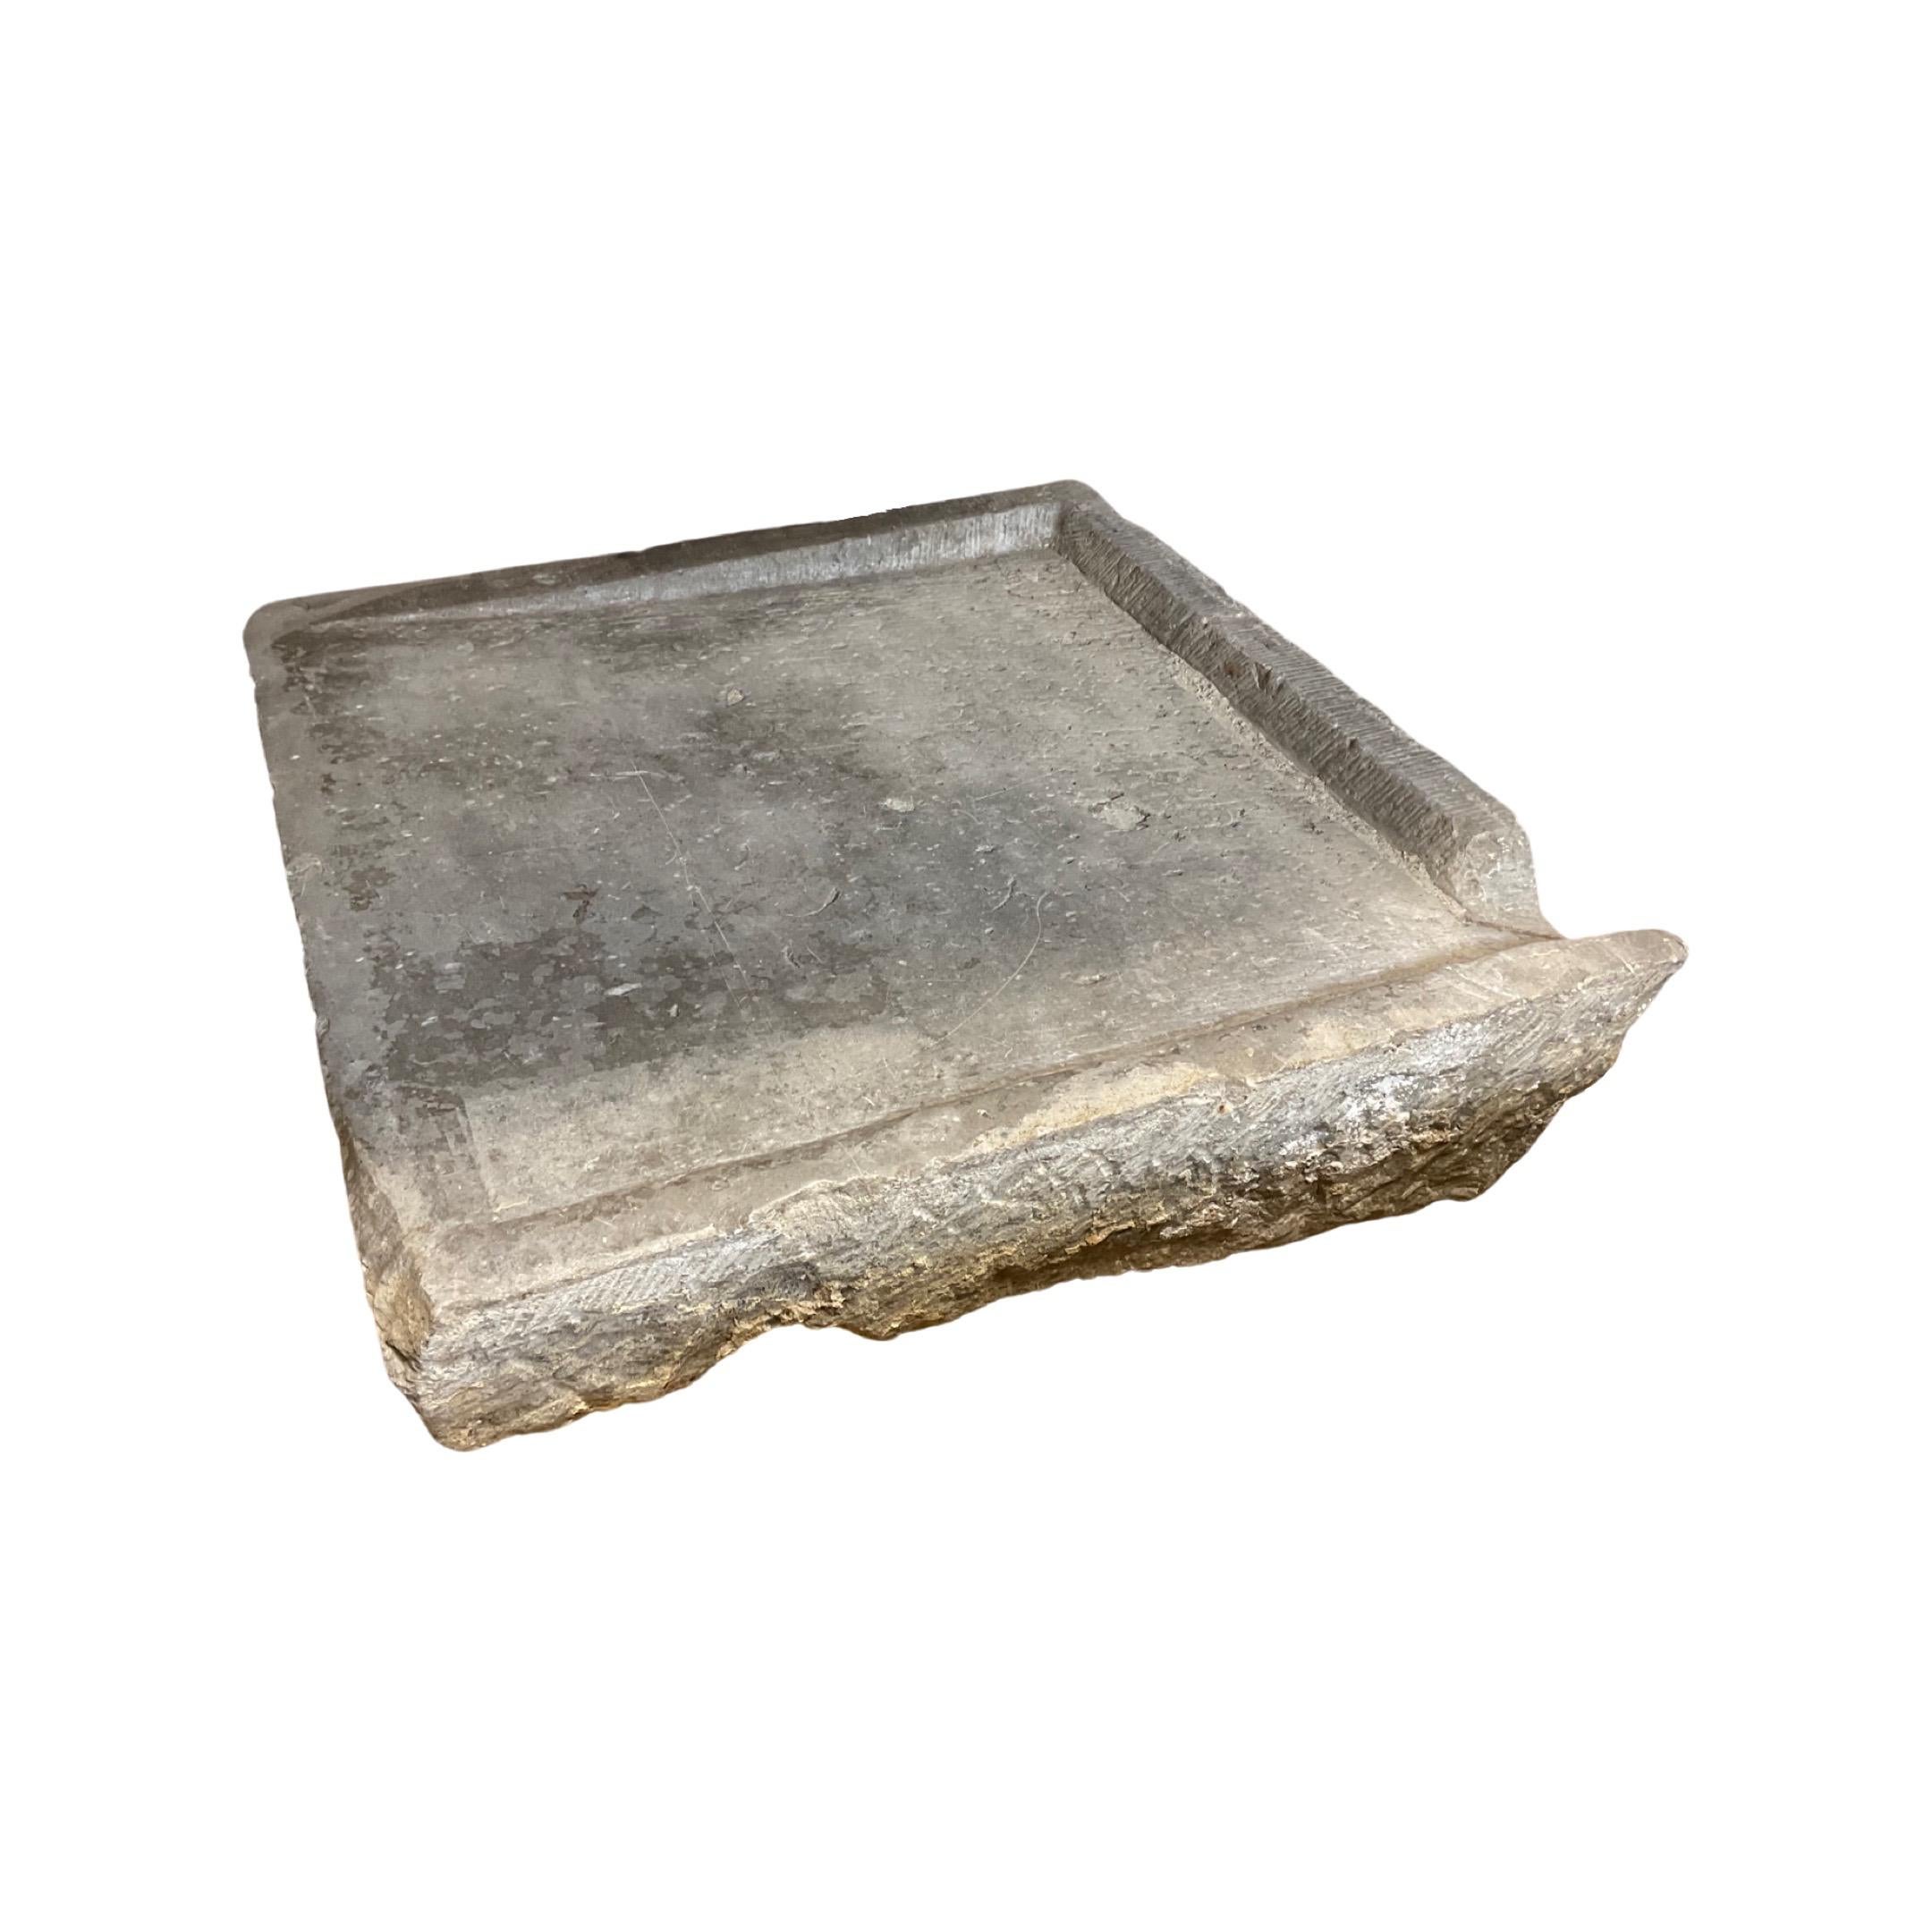 This Belgium bluestone sink is a luxurious piece of art, crafted in the 17th century. Its unique tones and textures are created naturally by mother nature. Its natural properties make it bacteria-resistant, and highly durable. Its beautiful color,